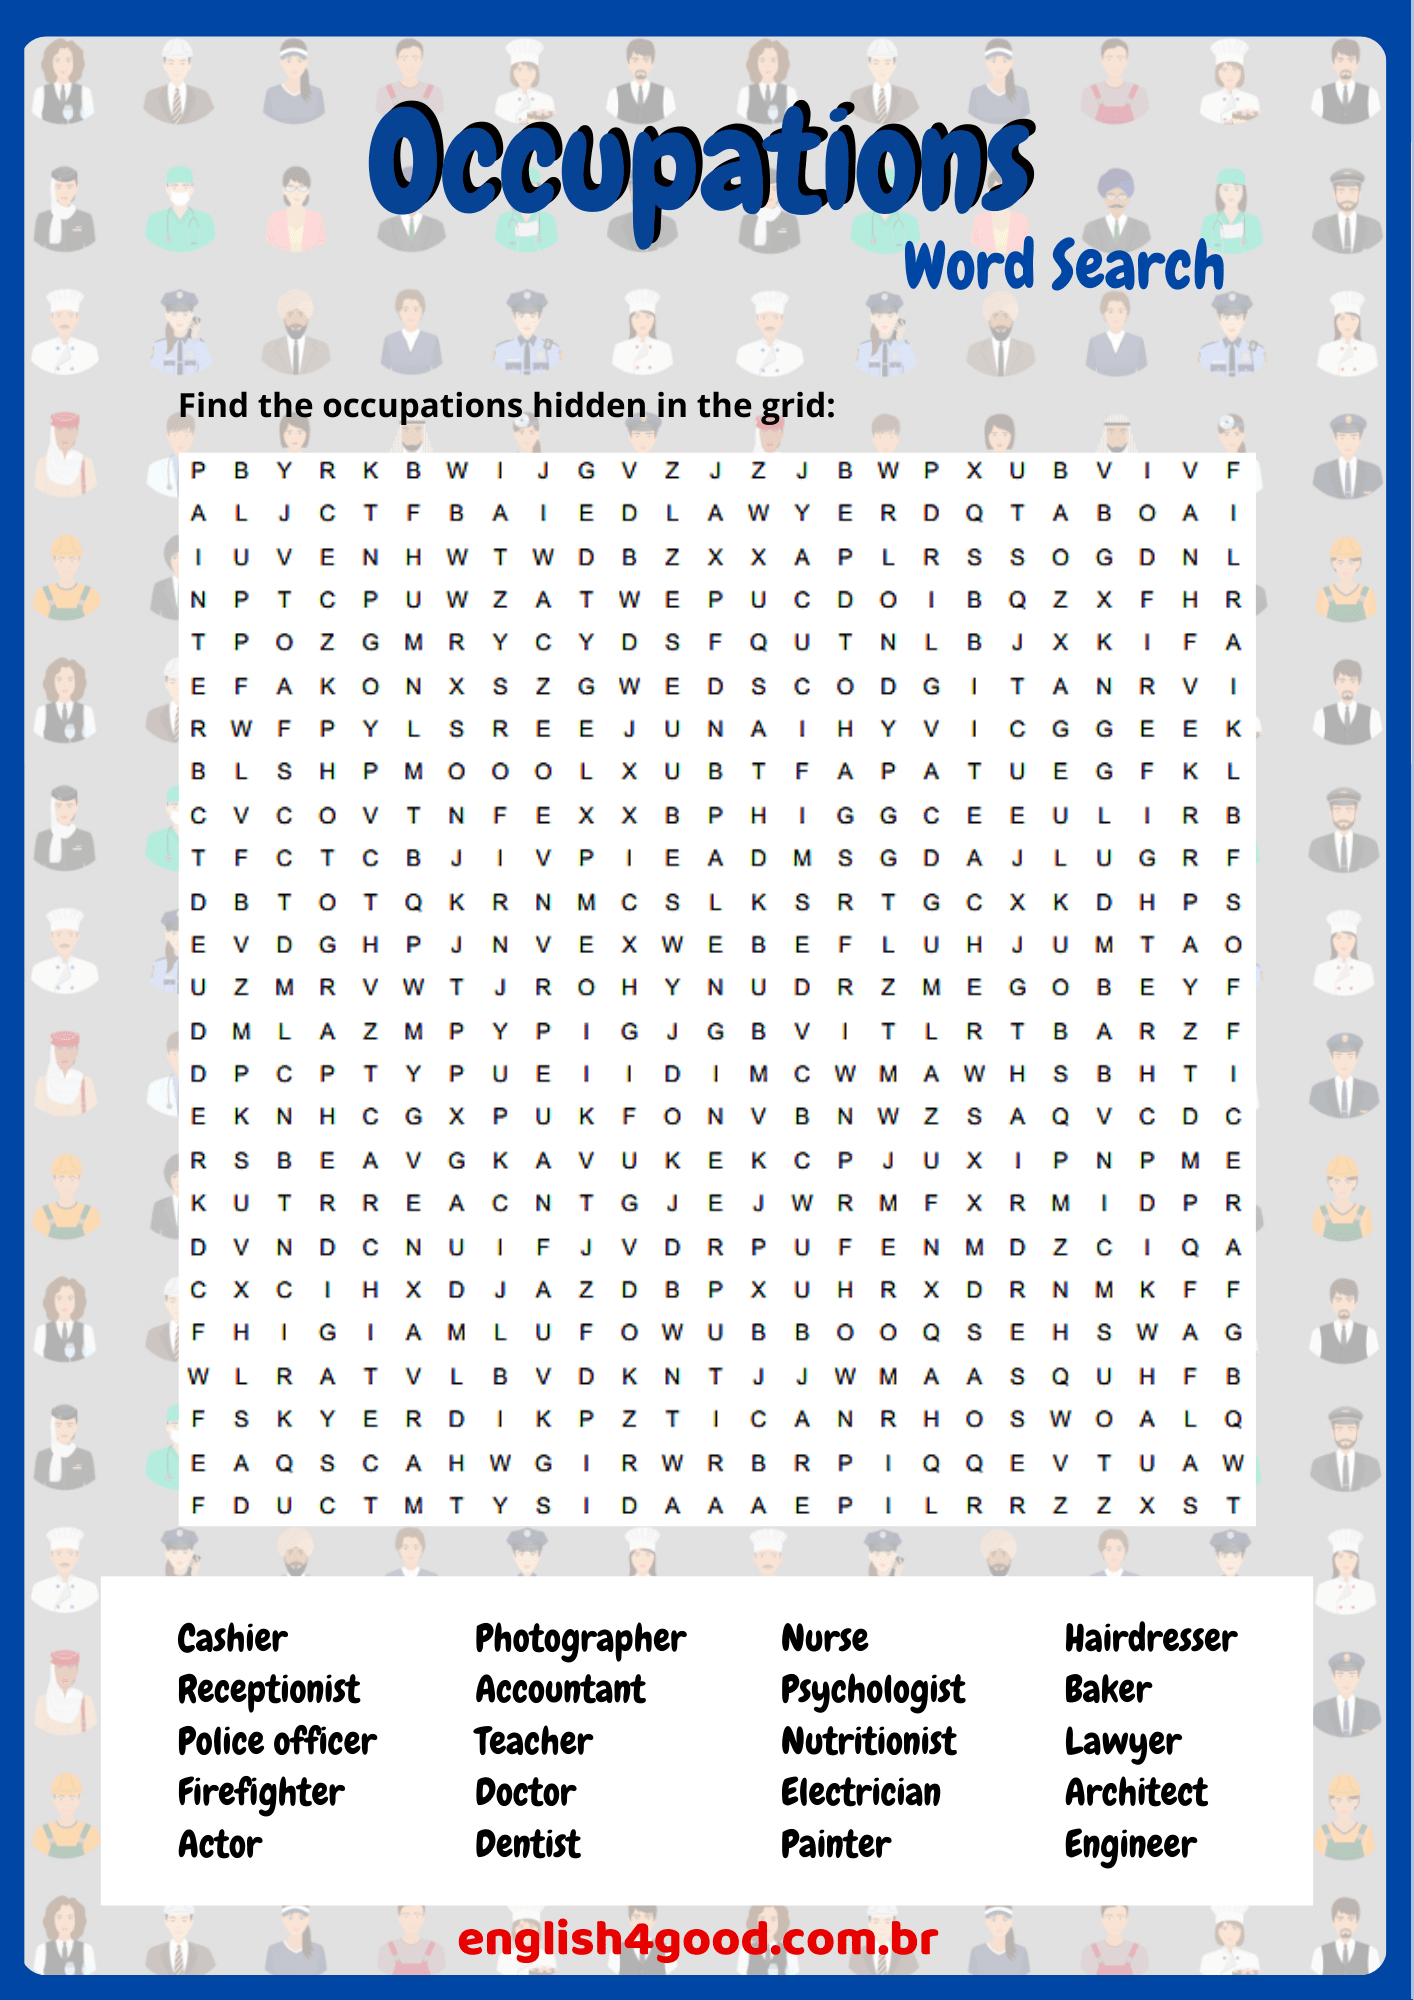 Word Search Activities - English4Good